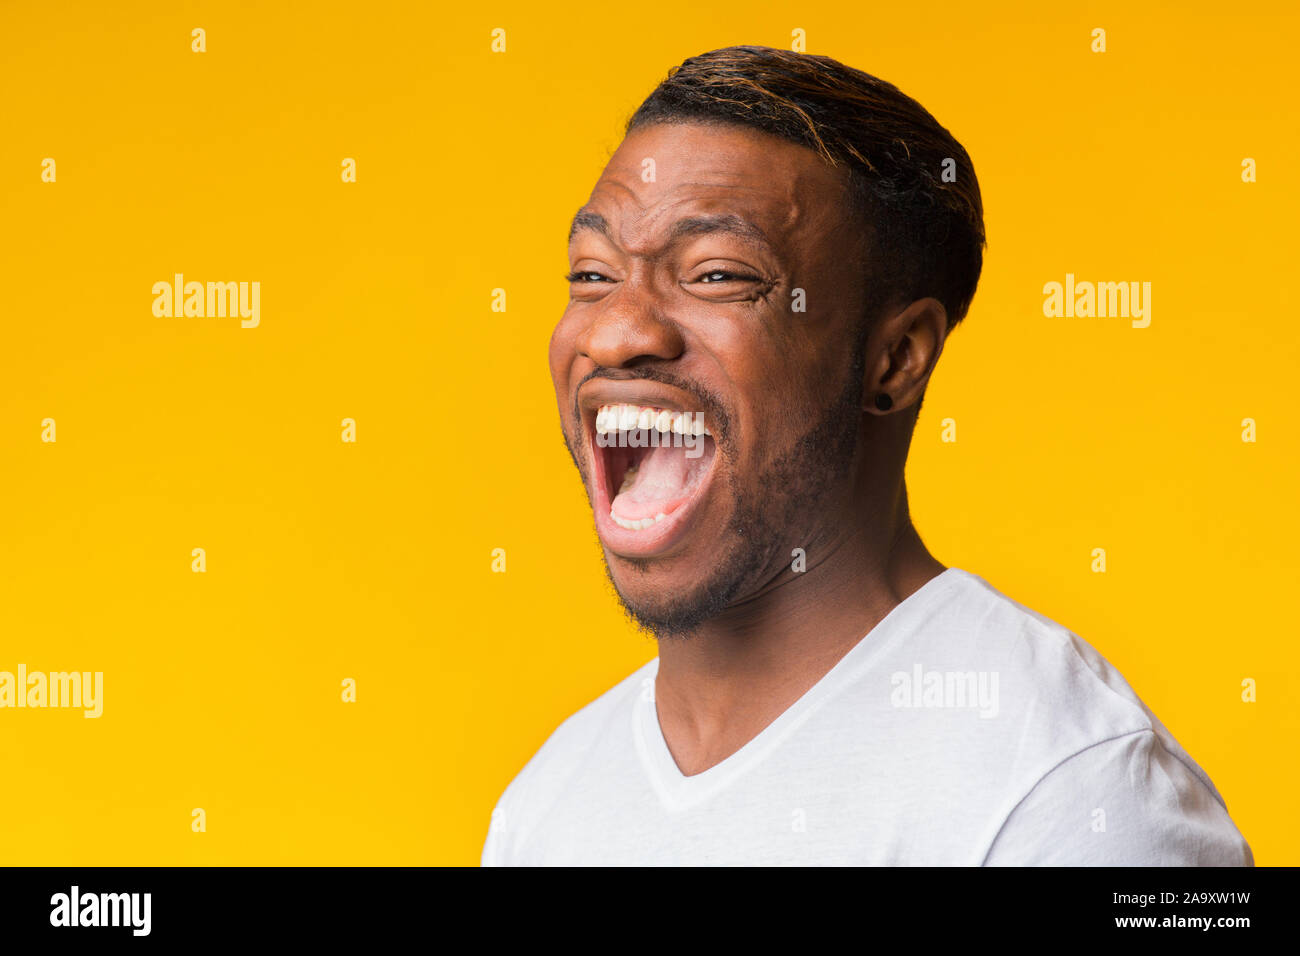 Portrait von Afro Kerl Laughing Out Loud in Studio Stockfoto